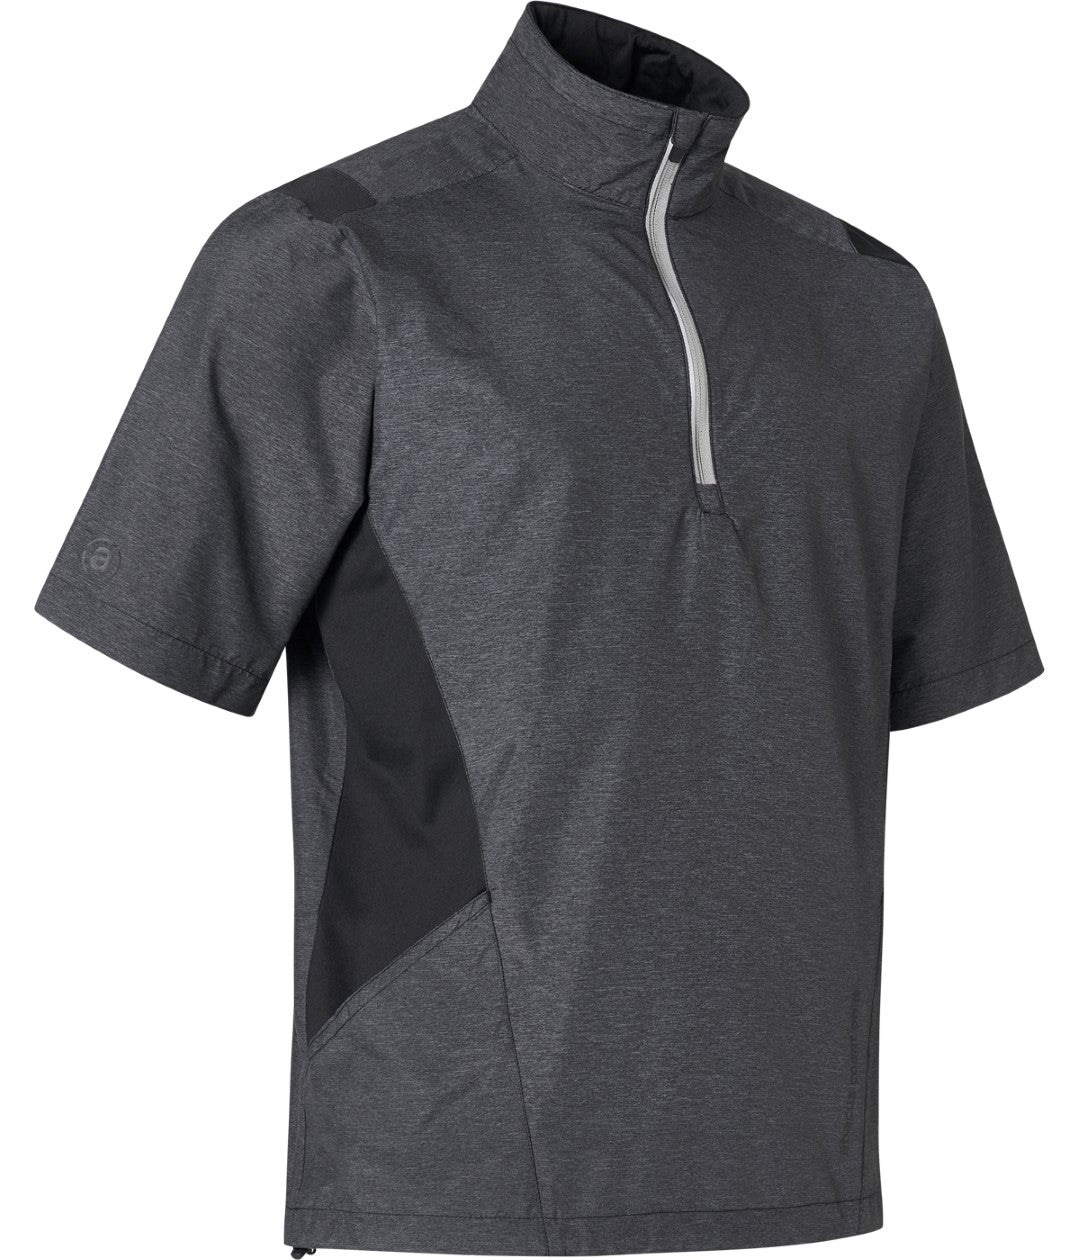 Abacus Sports Wear: Men’s High-Performance Stretch Windshirt – Birkdale